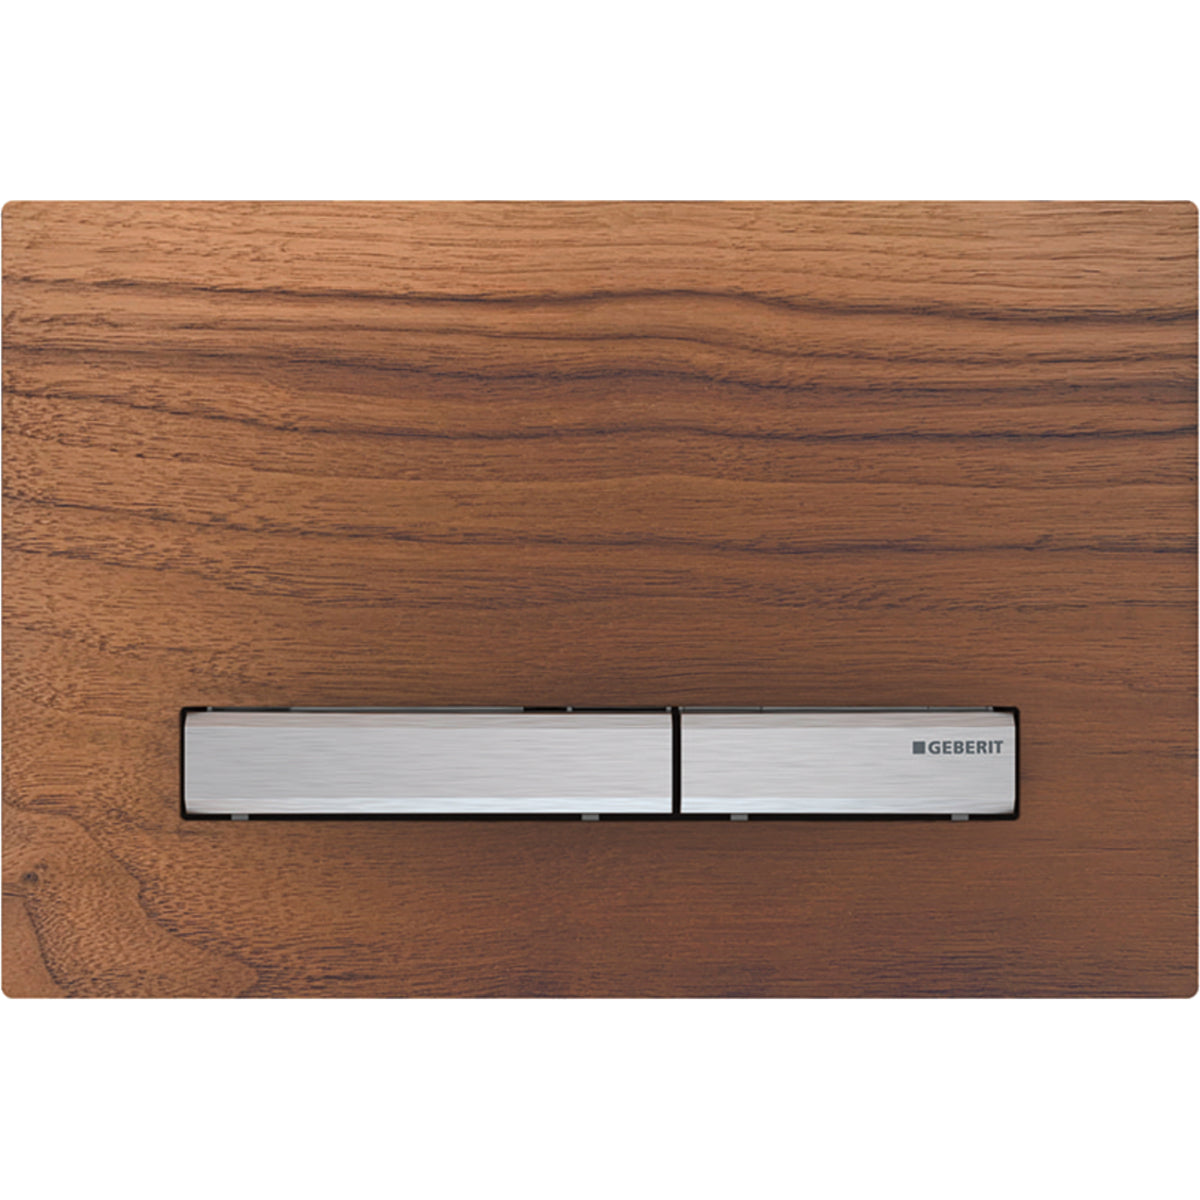 Geberit 115.788.JX.2- Geberit actuator plate Sigma50 for dual flush, metal colour chrome-plated: chrome-plated, black walnut - FaucetExpress.ca